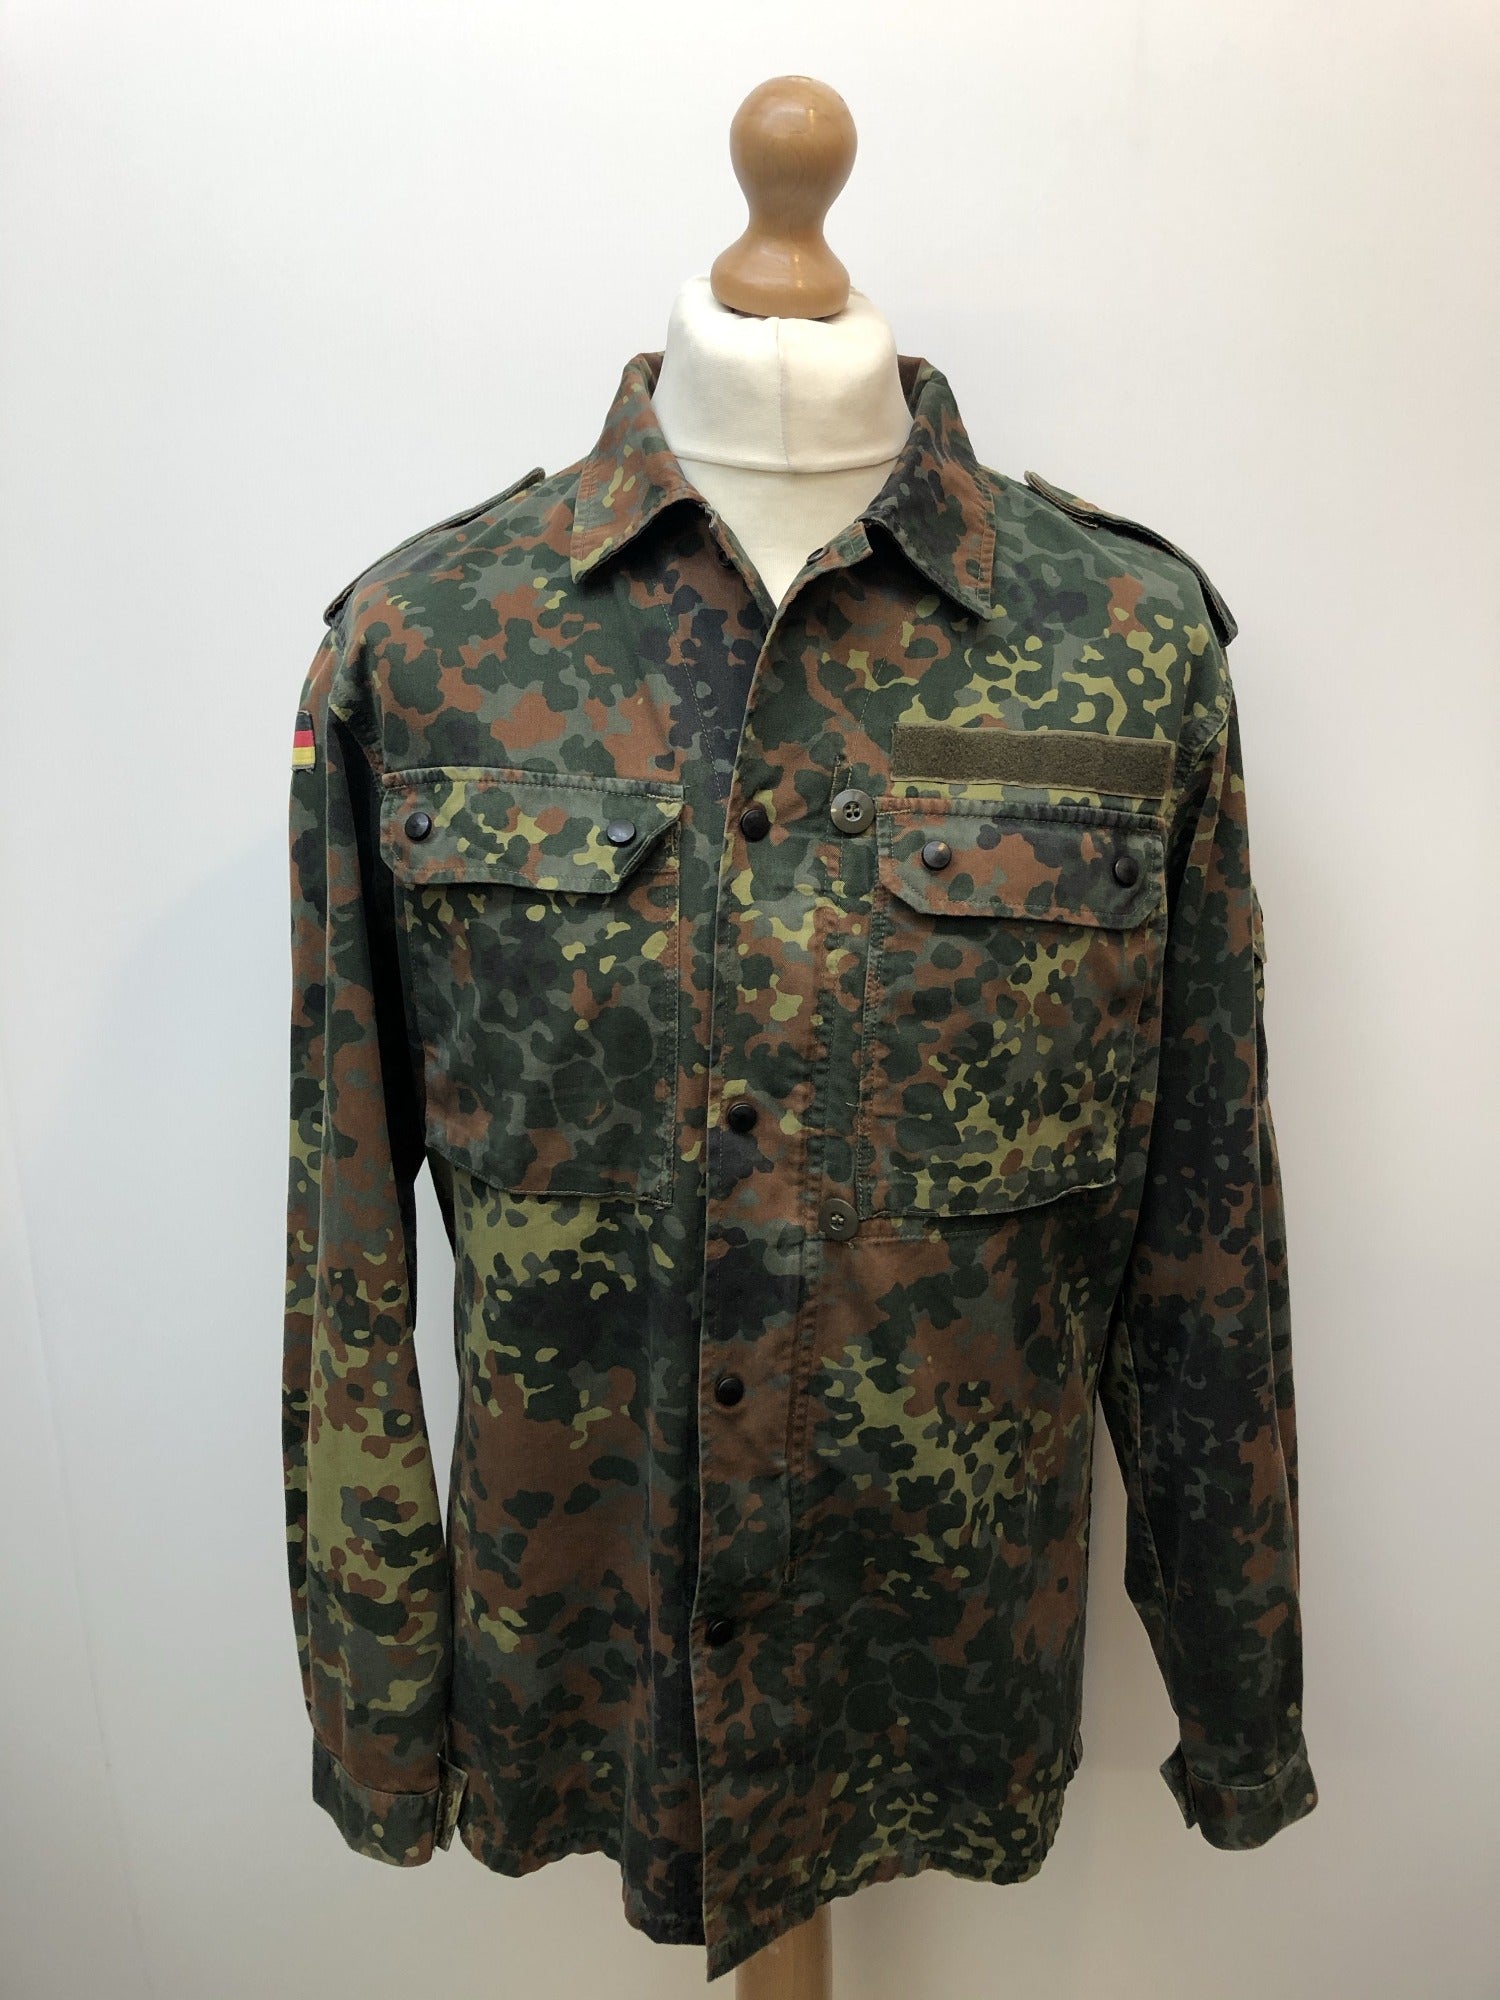 Mens Military Shirt Camouflage - Size Small - Urban Village Vintage 